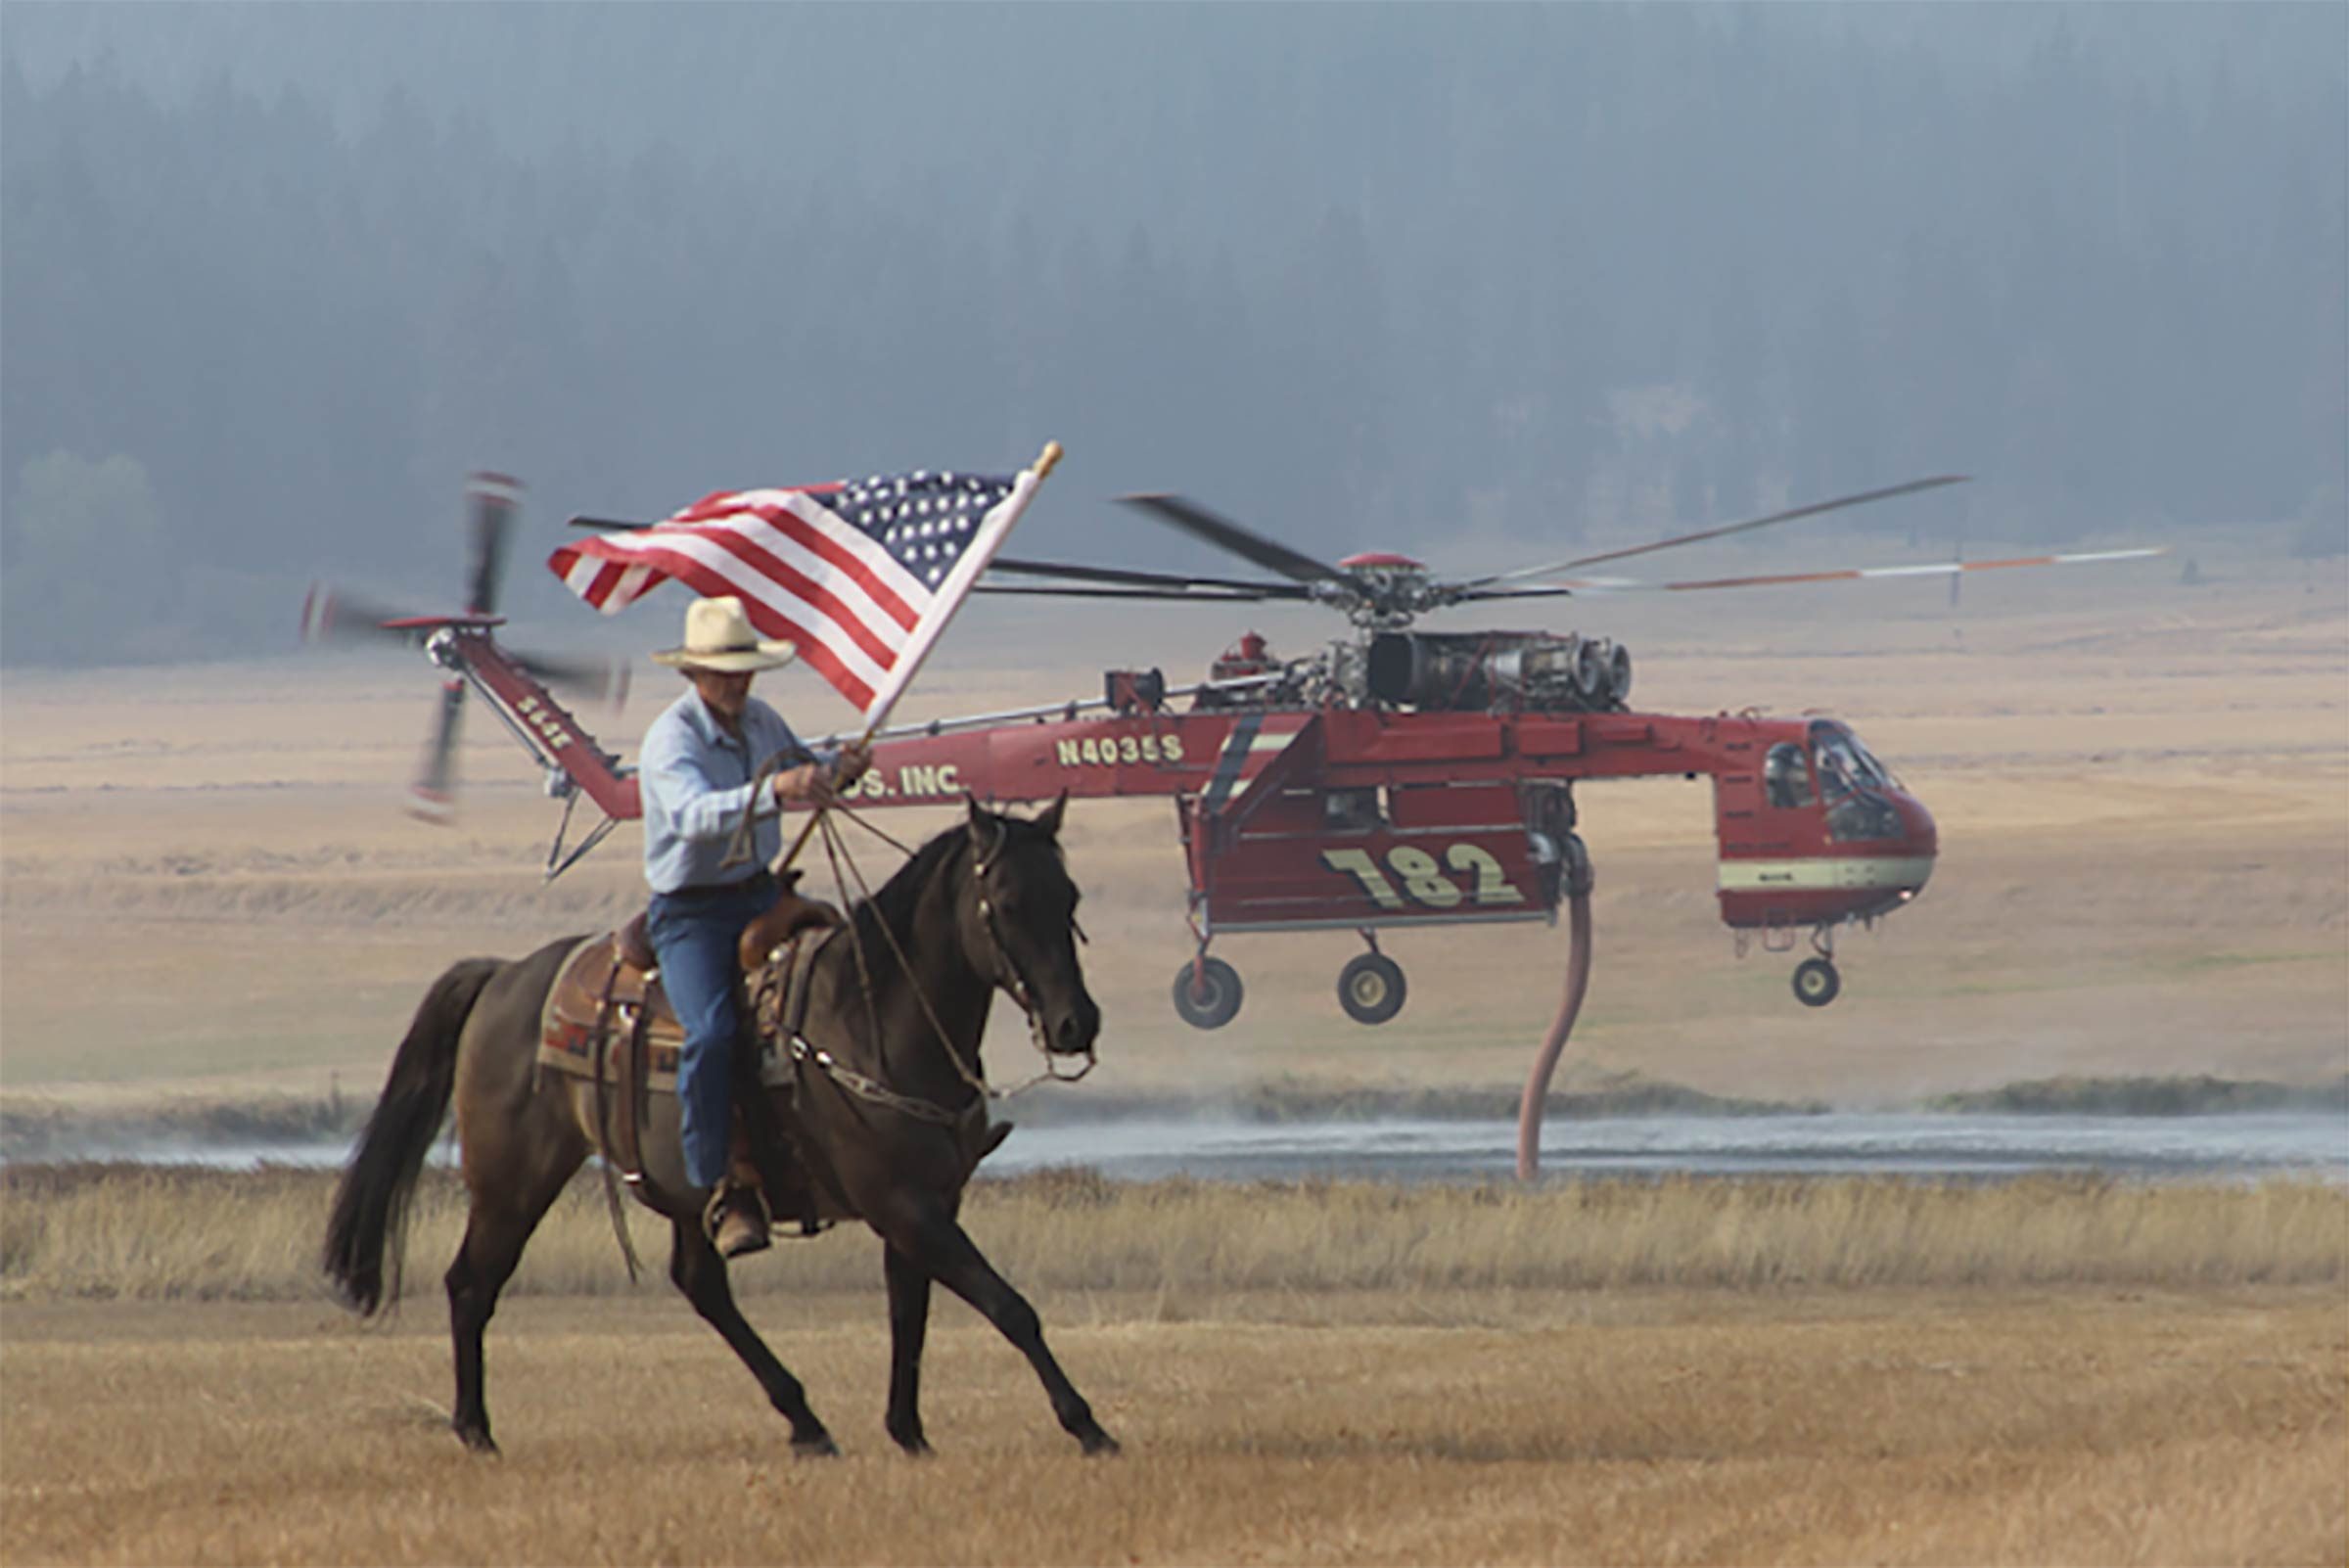 a man on a horse waves an american flag to show support for the fire department helicopter in the background